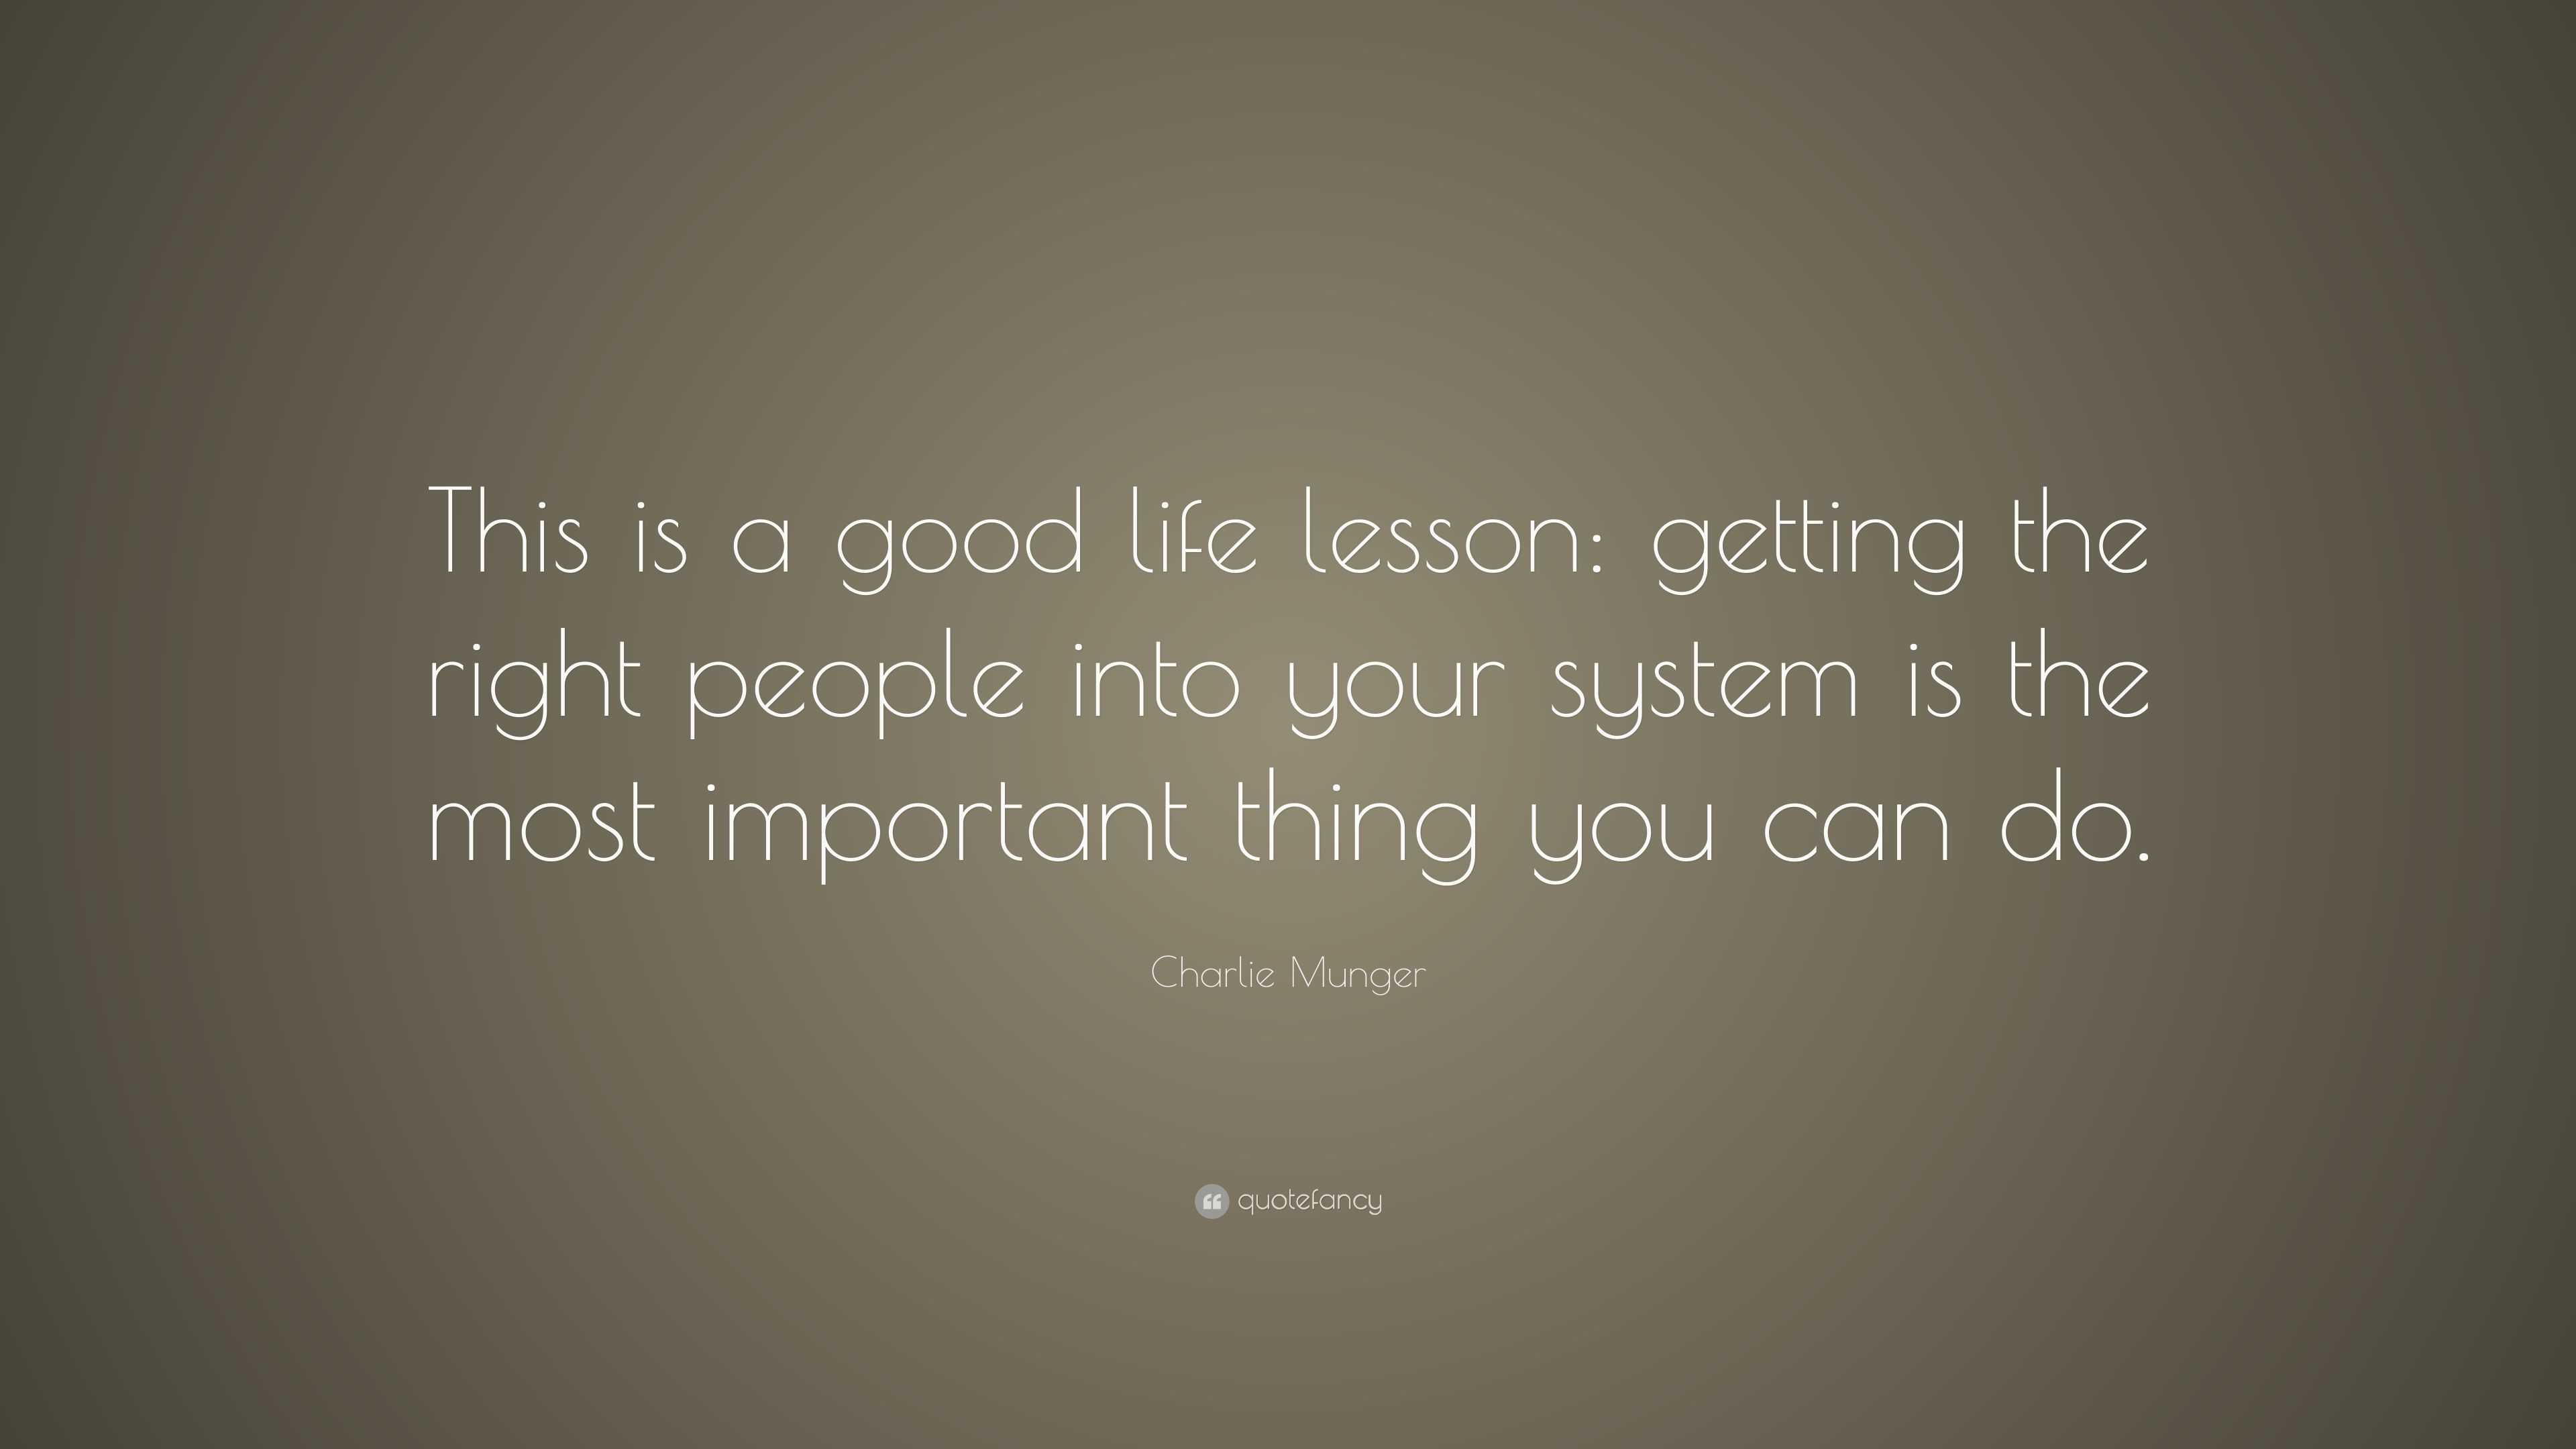 Life lesson quote  Life lesson quotes, Good life quotes, Lesson quotes